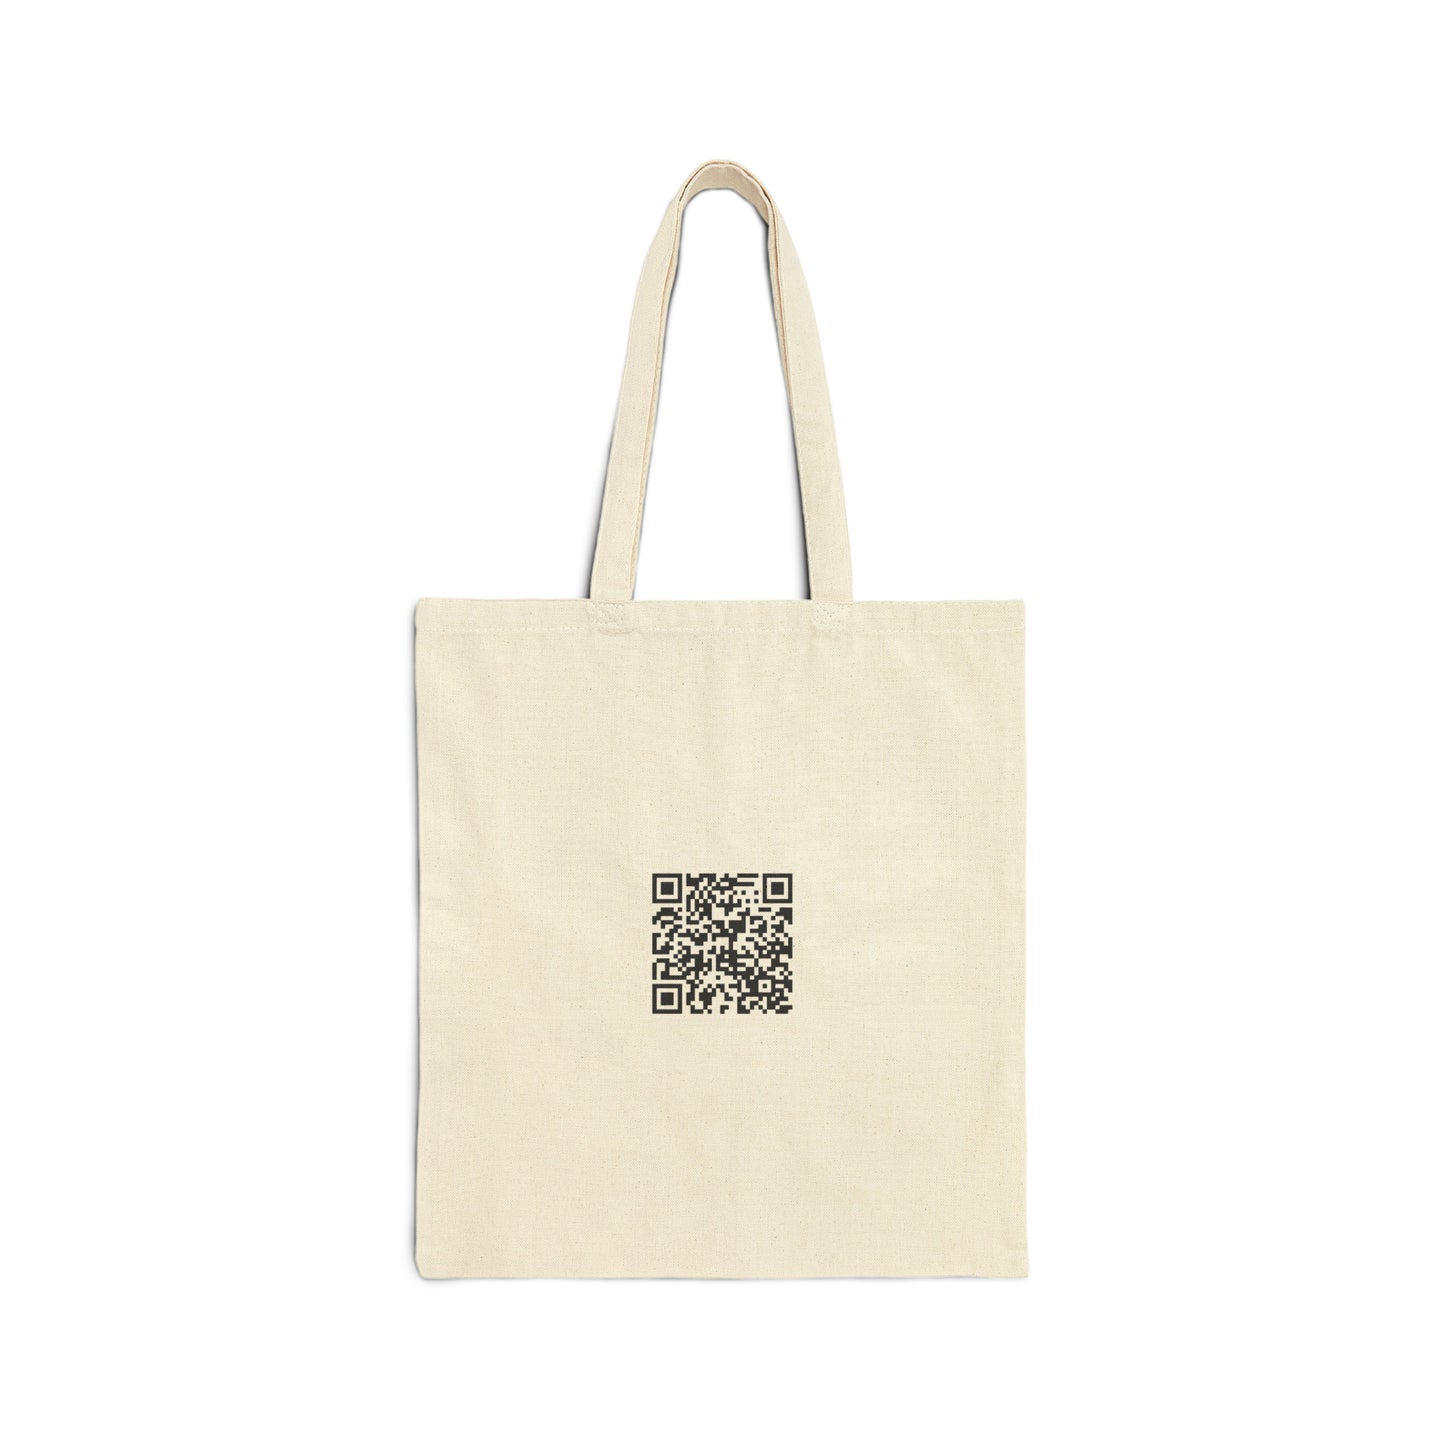 Land That Job - Moving Forward After Covid-19 - Cotton Canvas Tote Bag